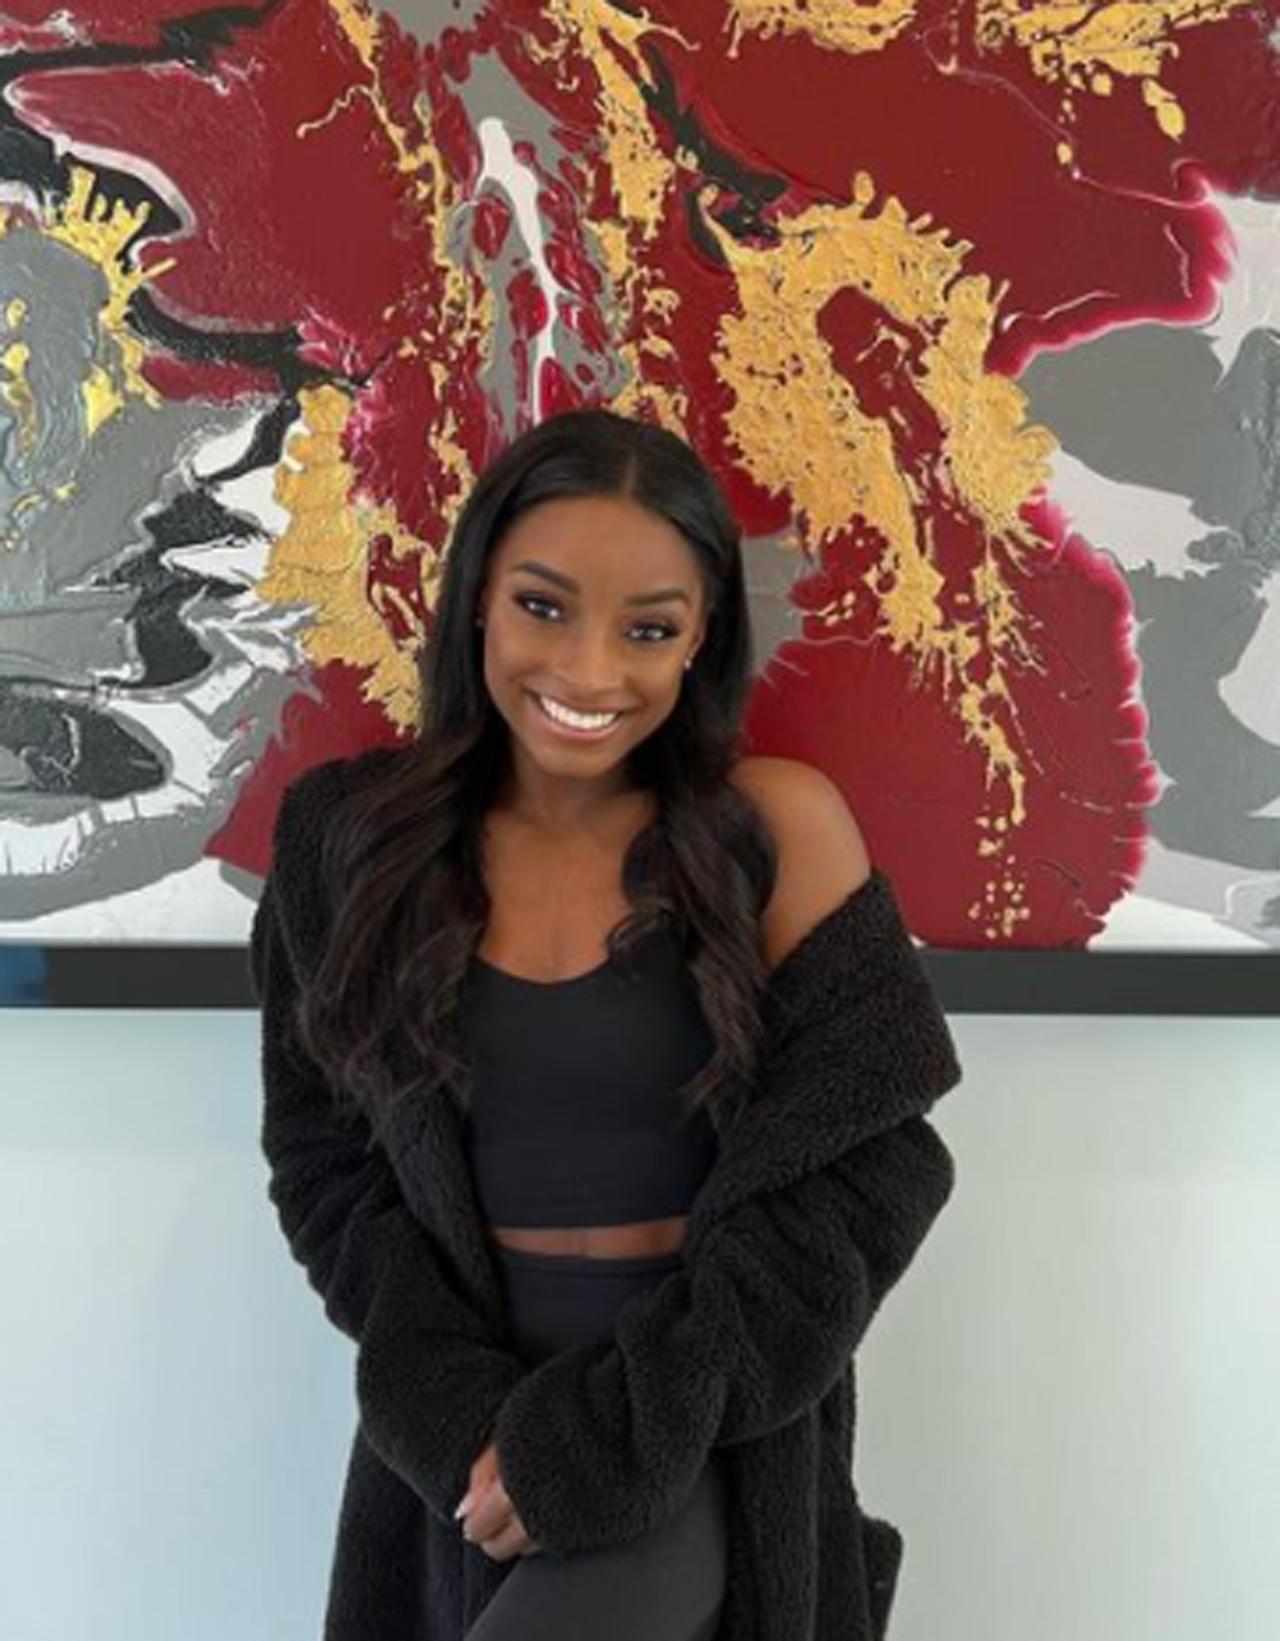 Simone Biles was the only athlete to qualify for all the finals at the 2020 Tokyo Olympics. After her show at the qualifiers, Biles cited the effect of the pressure of the Olympics weighing in on her. Simone Biles left the Olympics team competition citing mental health issues. She also said that she was inspired by Naomi Osaka who earlier withdrew from the French Open and Wimbledon for reasons similar to Biles. She withdrew subsequently from most competition categories at the Tokyo 2020 Olympics but competed in the beam finals to take home a bronze medal. In doing so she is the joint-record holder for most Olympic medals by an American female gymnast.